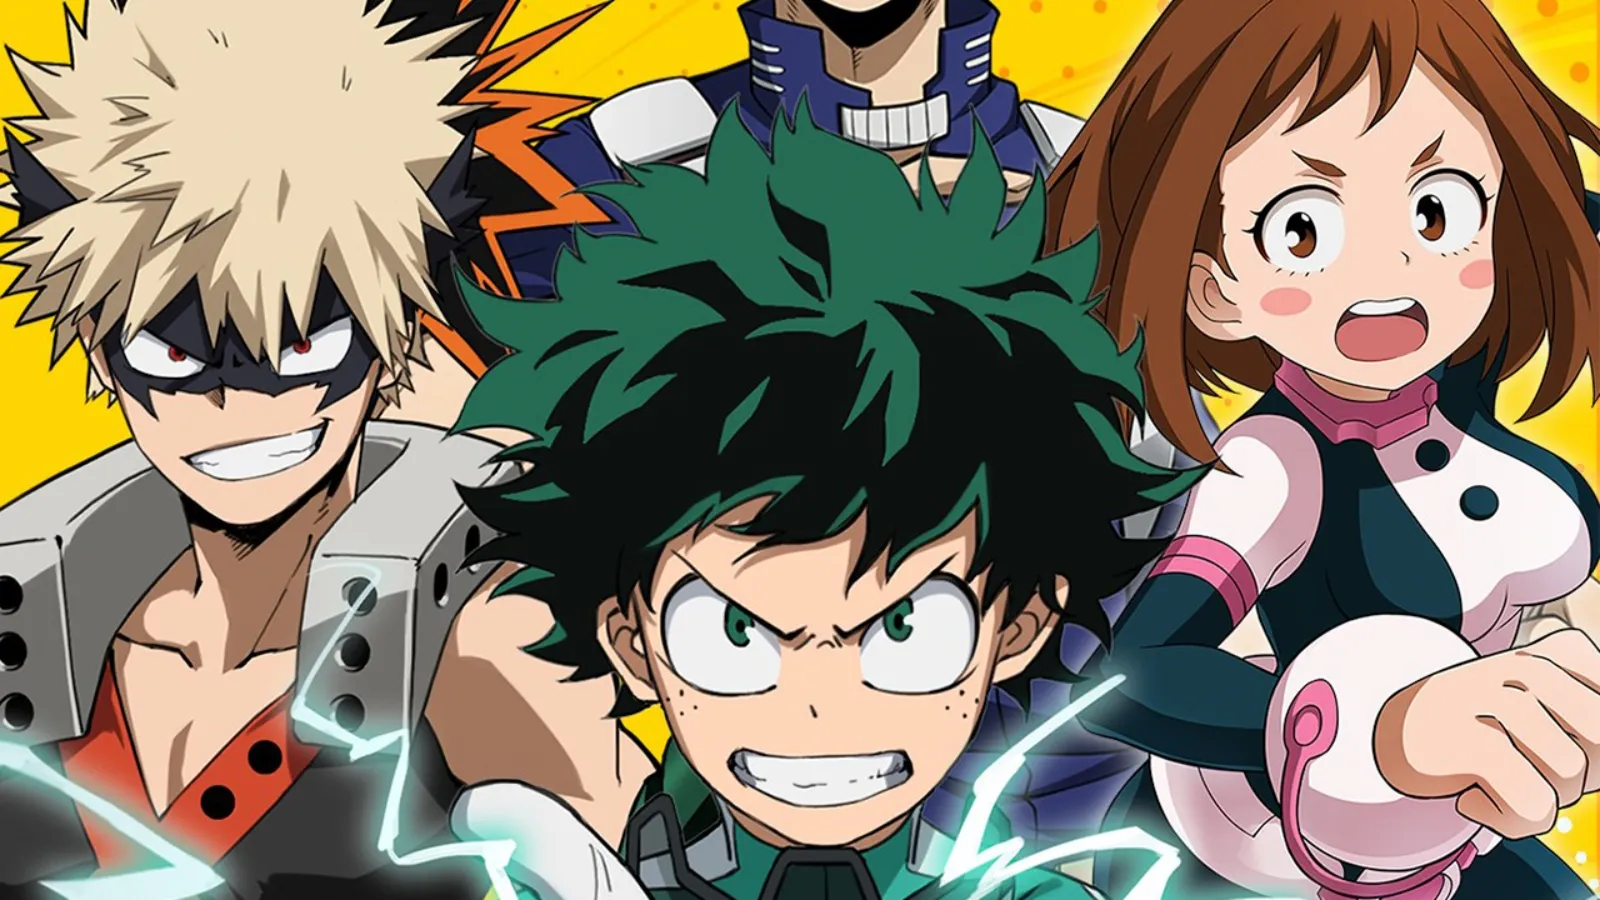 Breaking: My Hero Academia's 4th Movie Buzz, Plus What's Next for Fans!